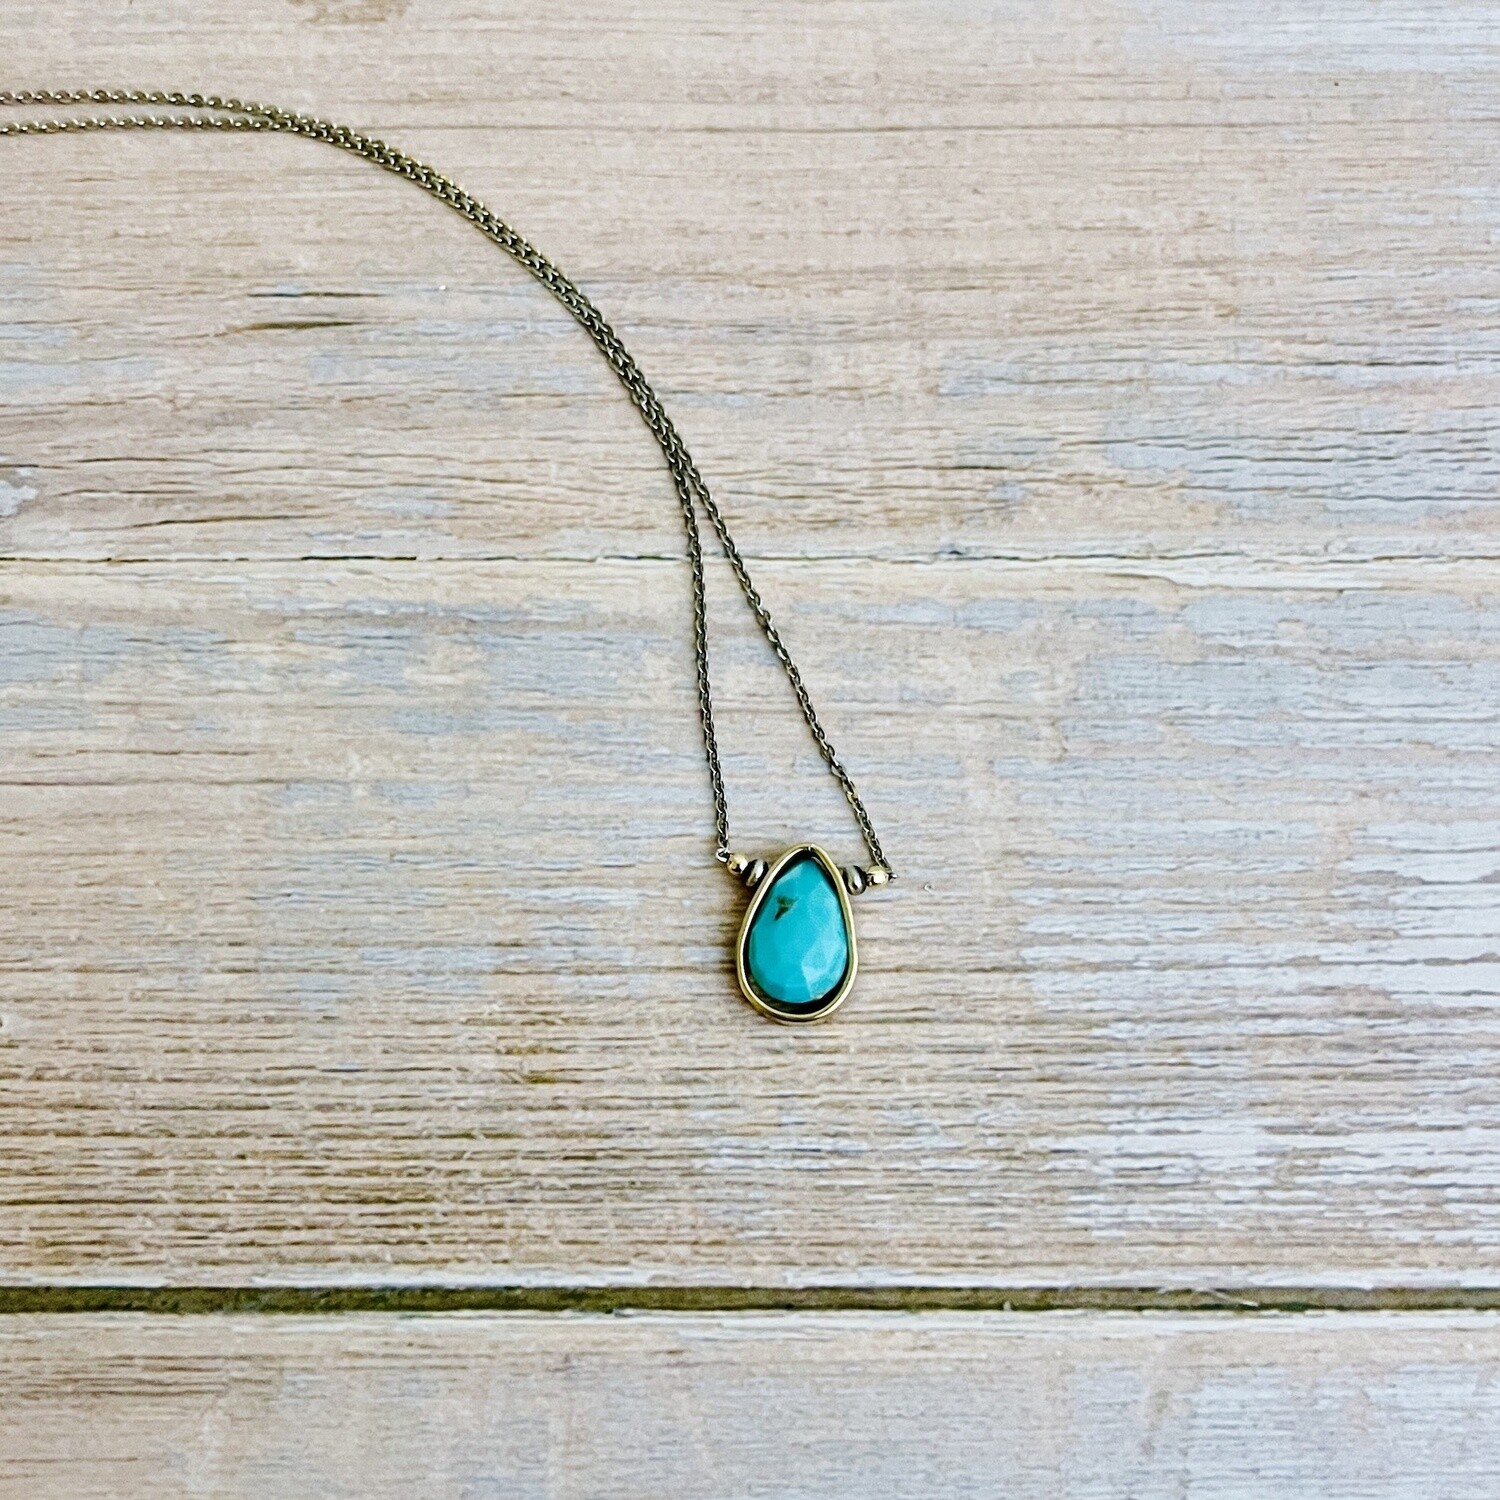 Handmade 12mm Faceted Turquoise in 14k GF Teardrop on Sterling Chain Necklace